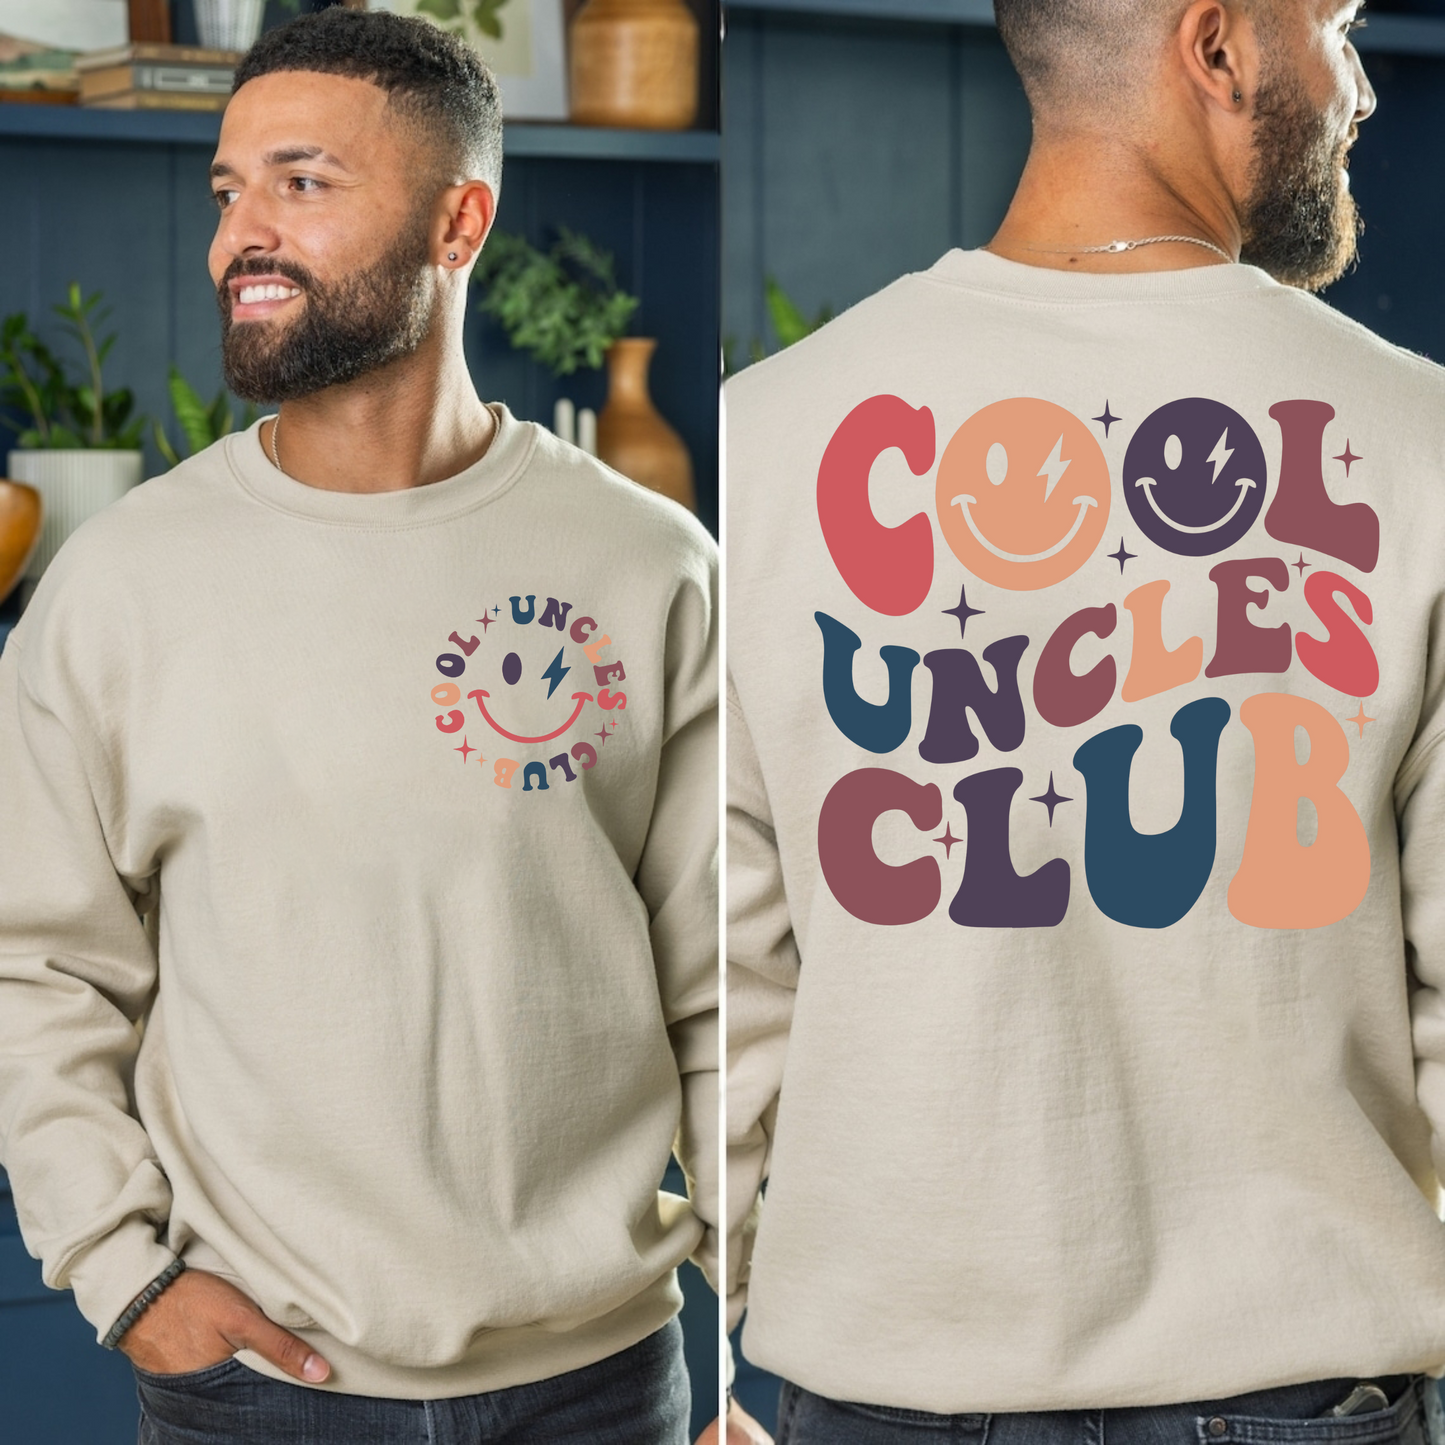 Cool Uncles Club - Celebrate the Fun Unconventional Bond